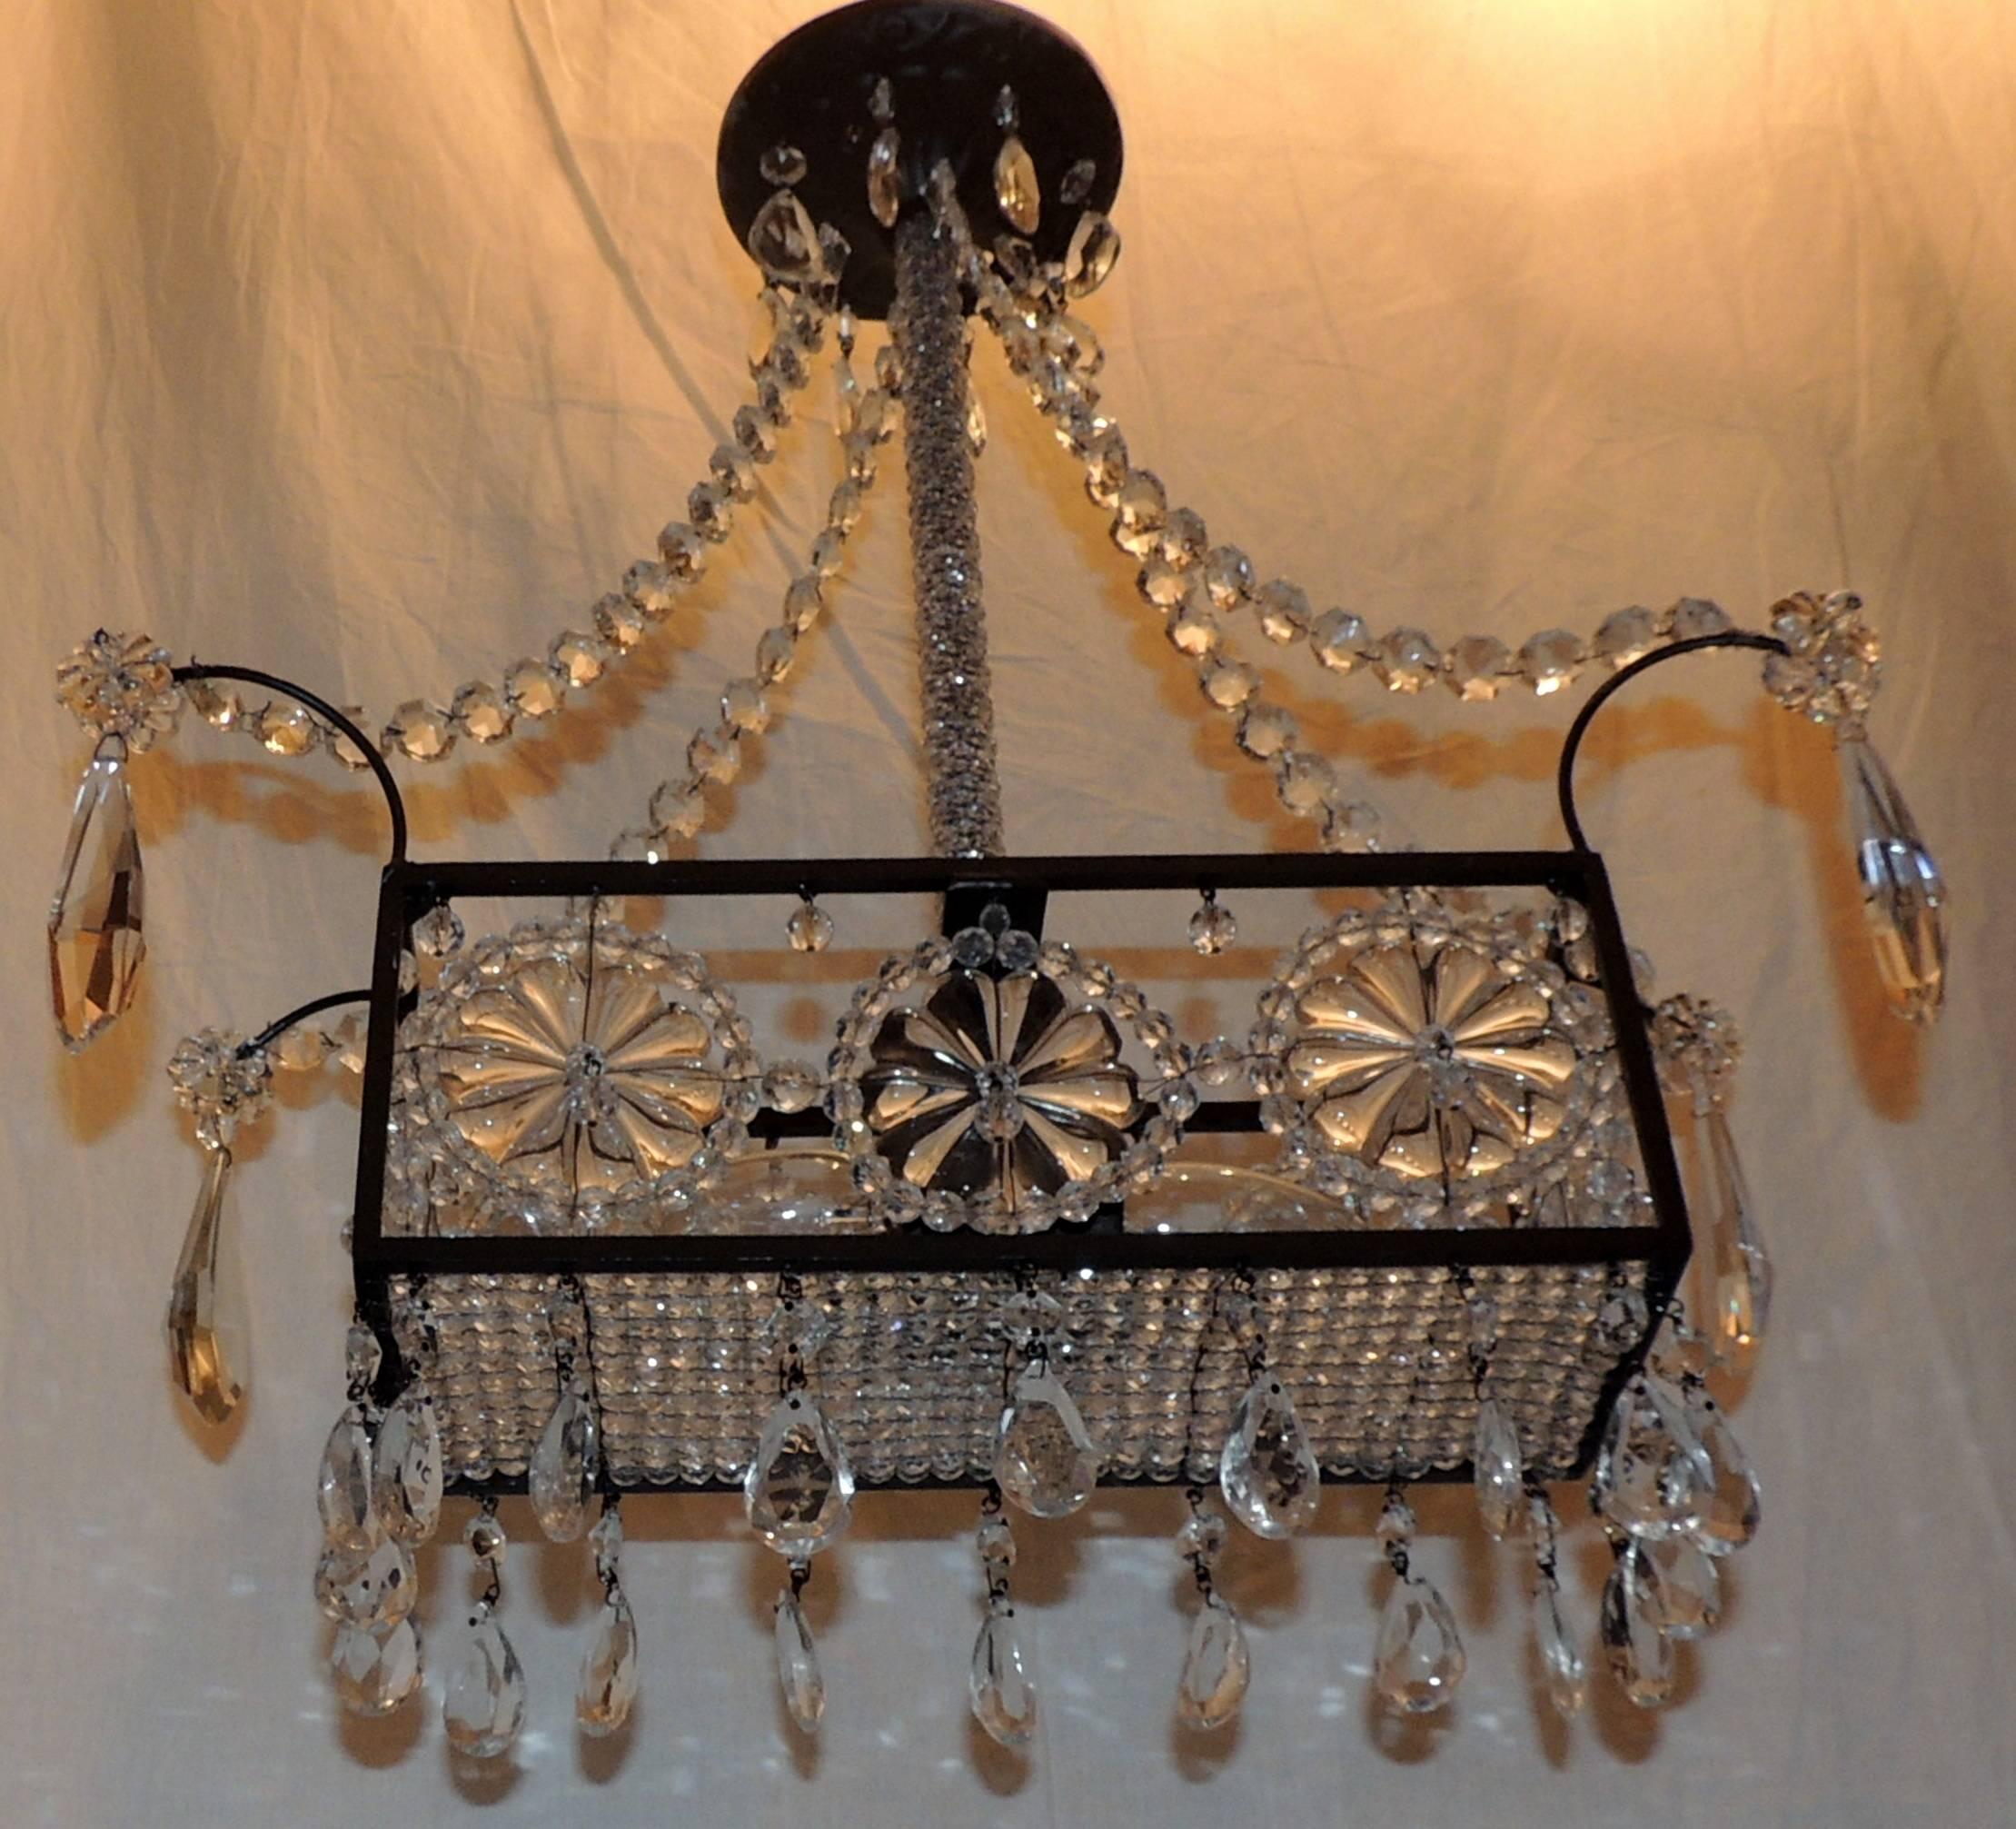 A wonderful Pair beaded Italian, rectangle form flower crystal basket two Edison light fixtures. Each has 2 Edison bulbs Taking A Max. 75 Watts Per Socket.
These beautiful fixtures can be made any height by cutting the center shaft or adding chain